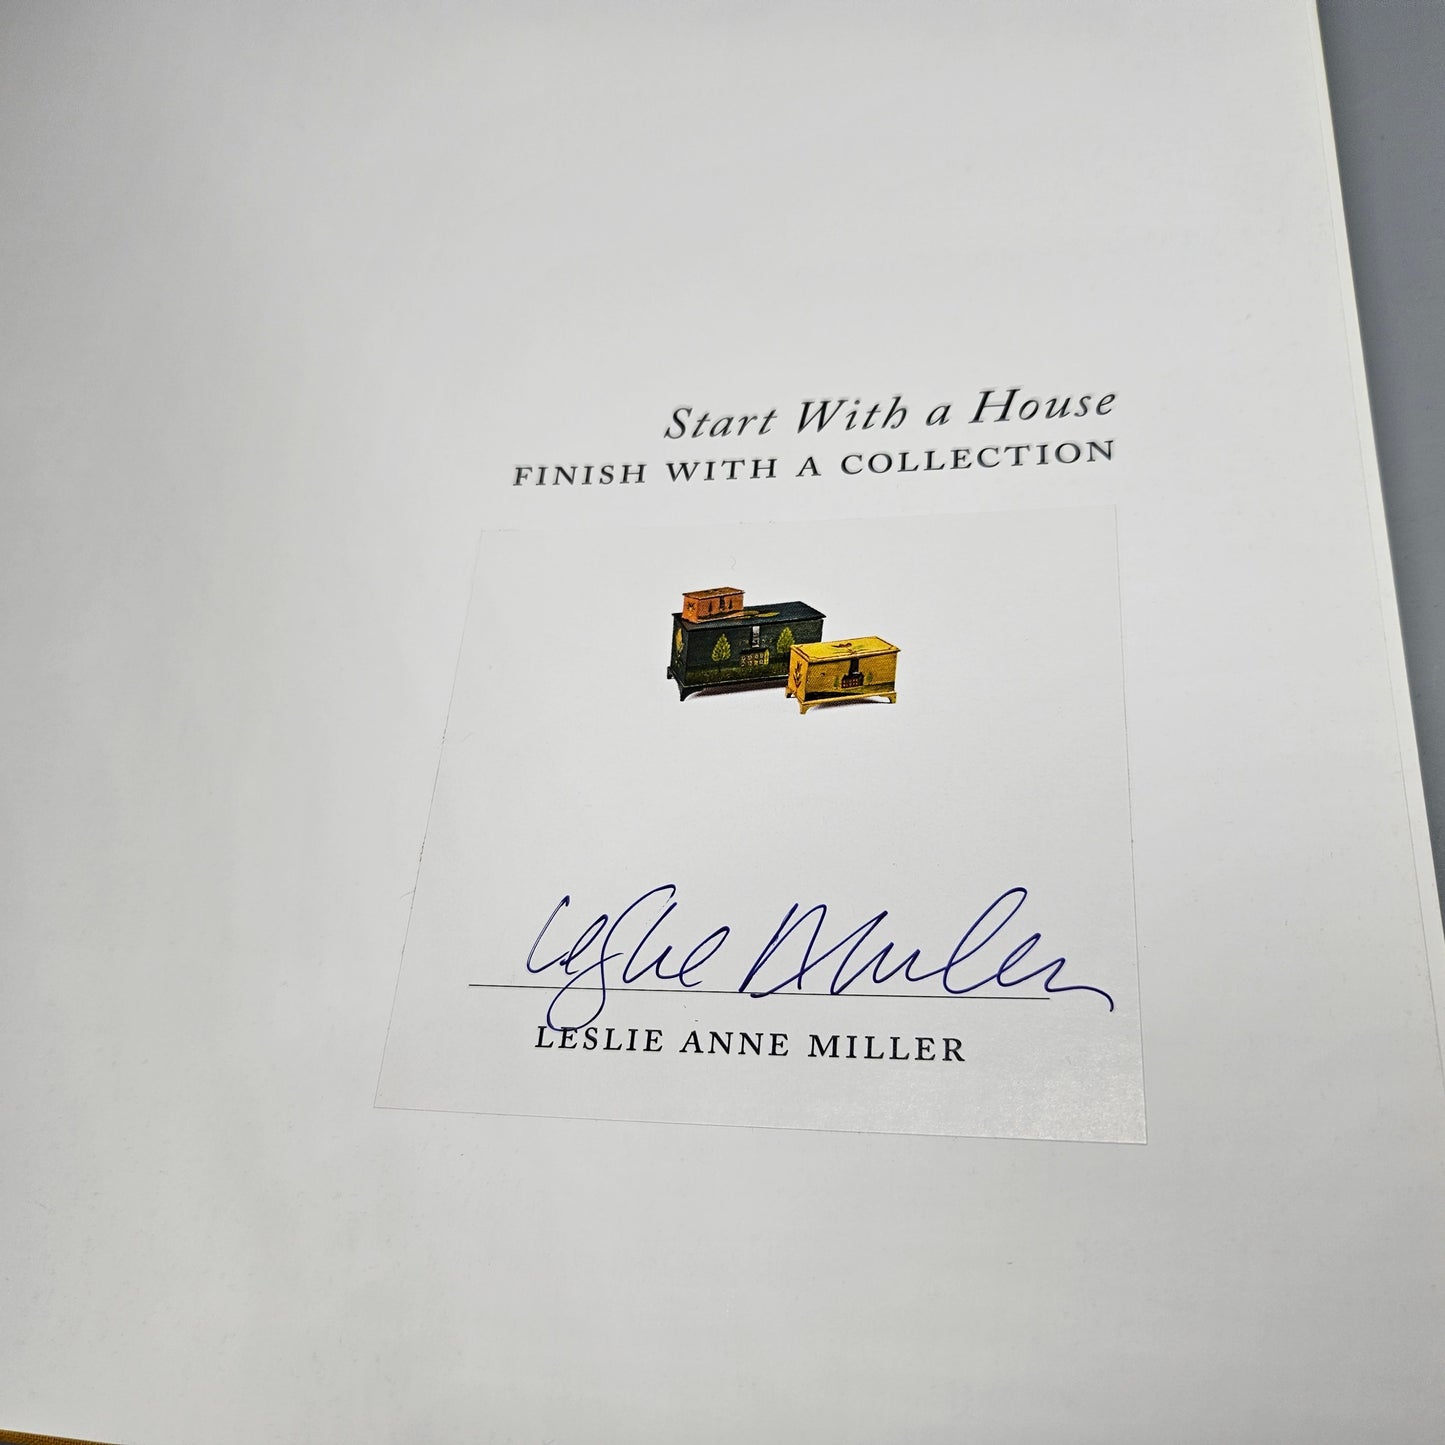 Book - Leslie Anne Miller "Start with a House Finish with a Collection" Signed